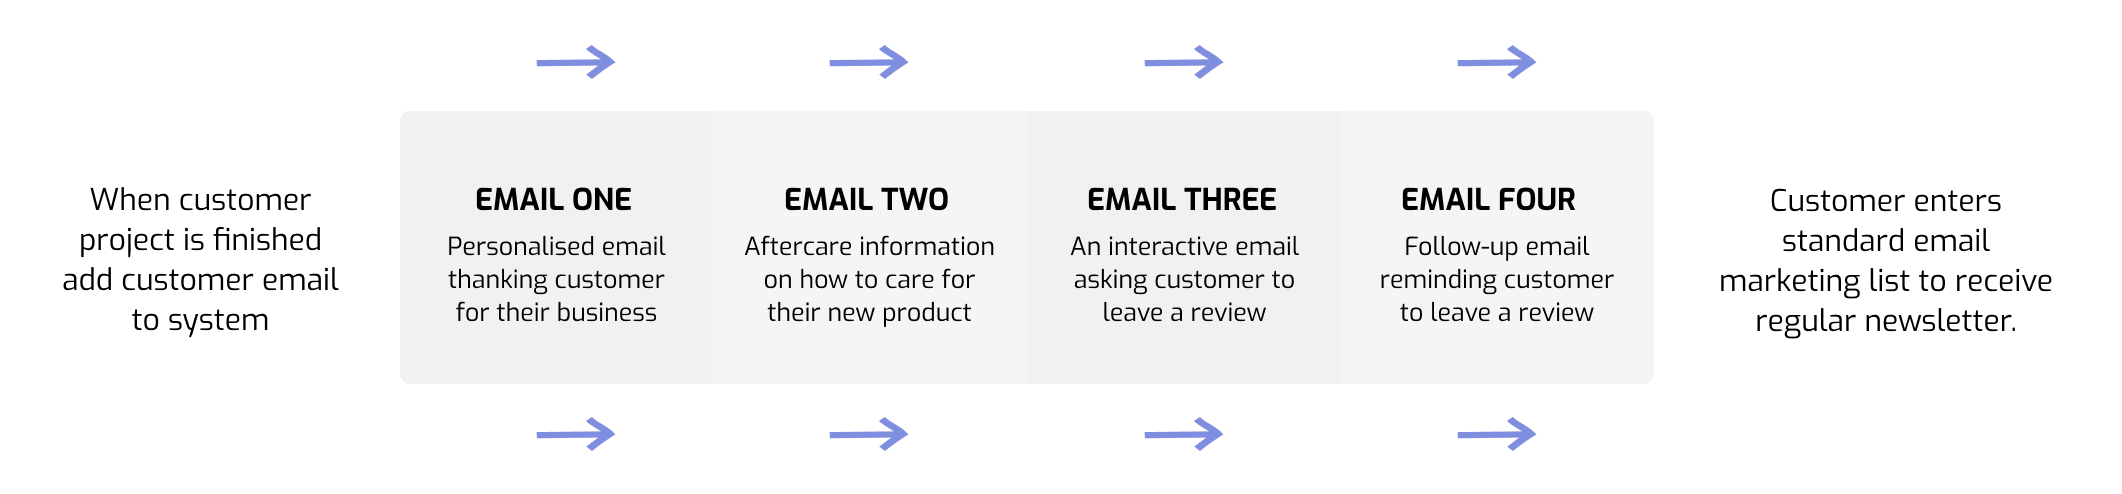 Email Automation process - reviews